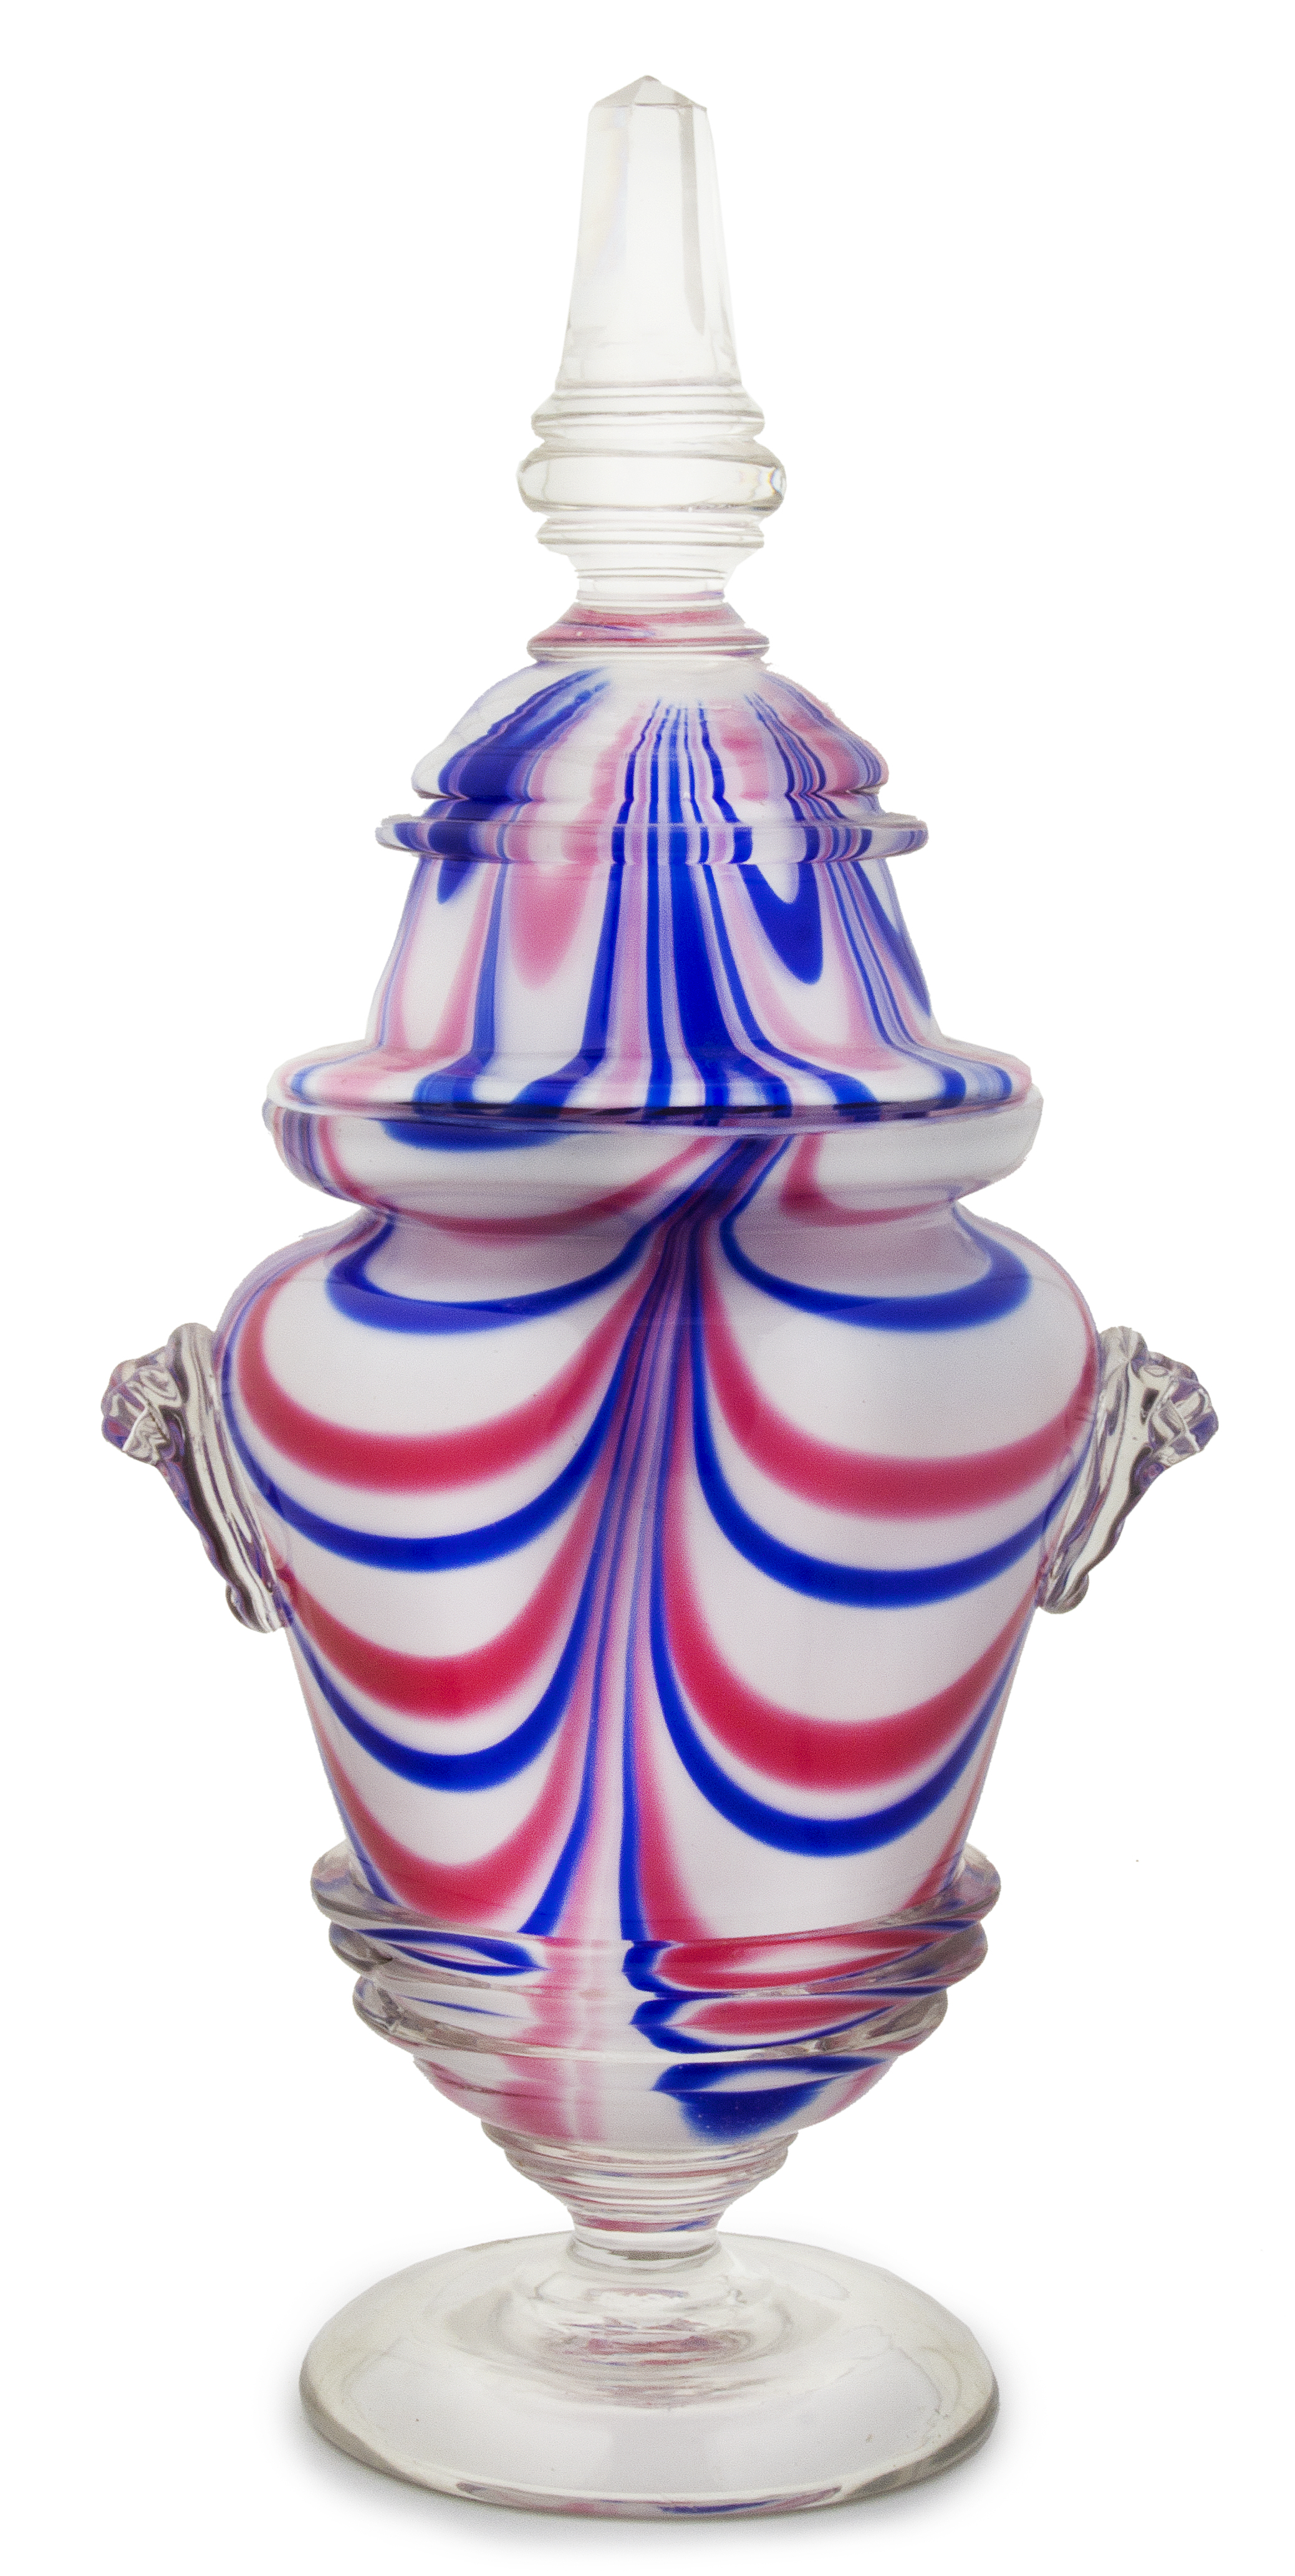 Pittsburgh Glass, Urn & Cover, Red & Blue Looping
Probably Pittsburg, circa 1860, entire view 1